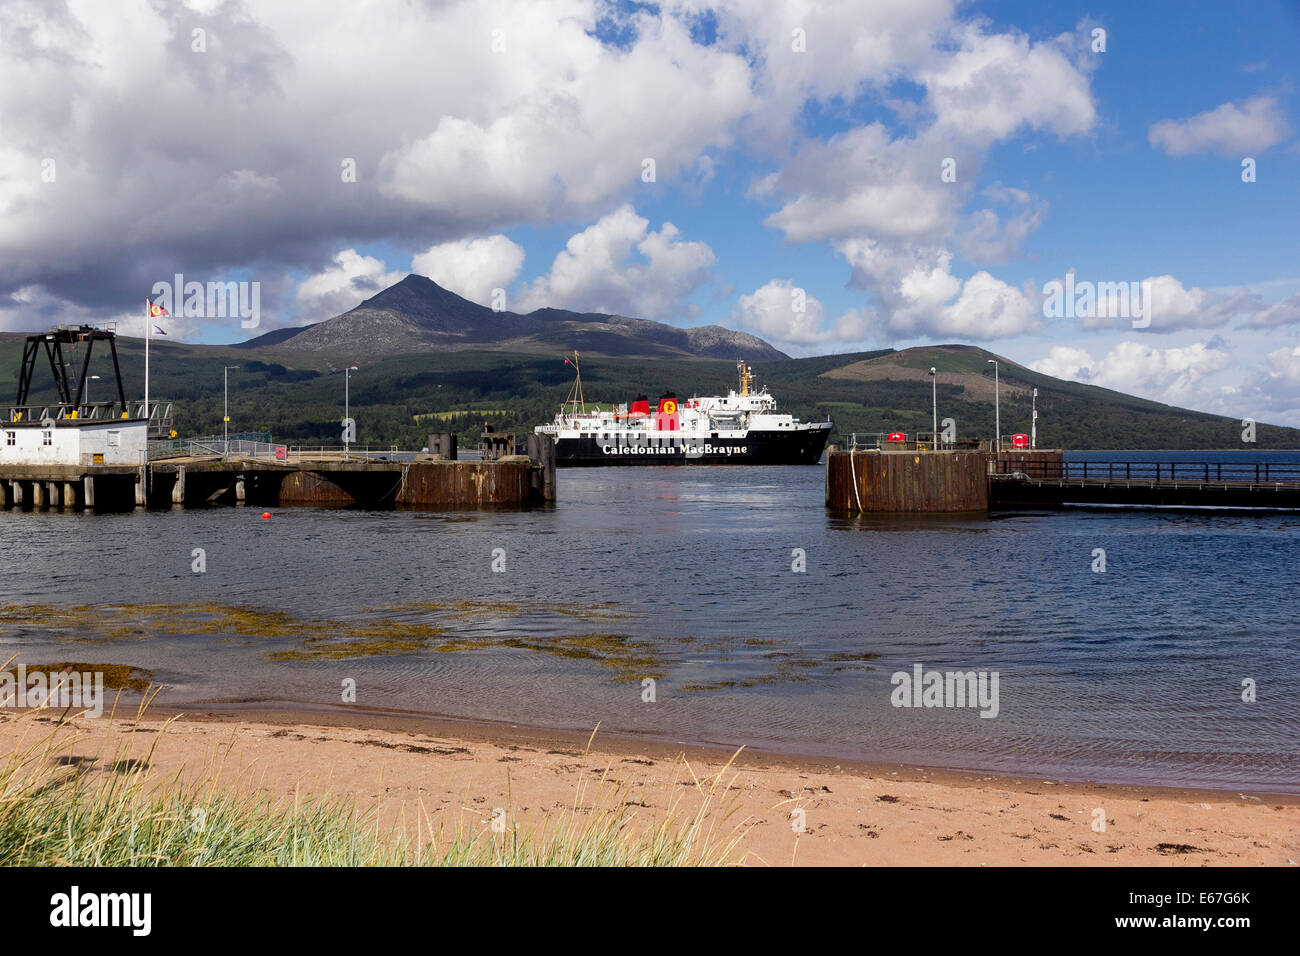 At Brodick, the Isle of Arran ferry service run by Caledonian MacBrayne from Ardrossan. Mountains of Arran in the background, in Stock Photo